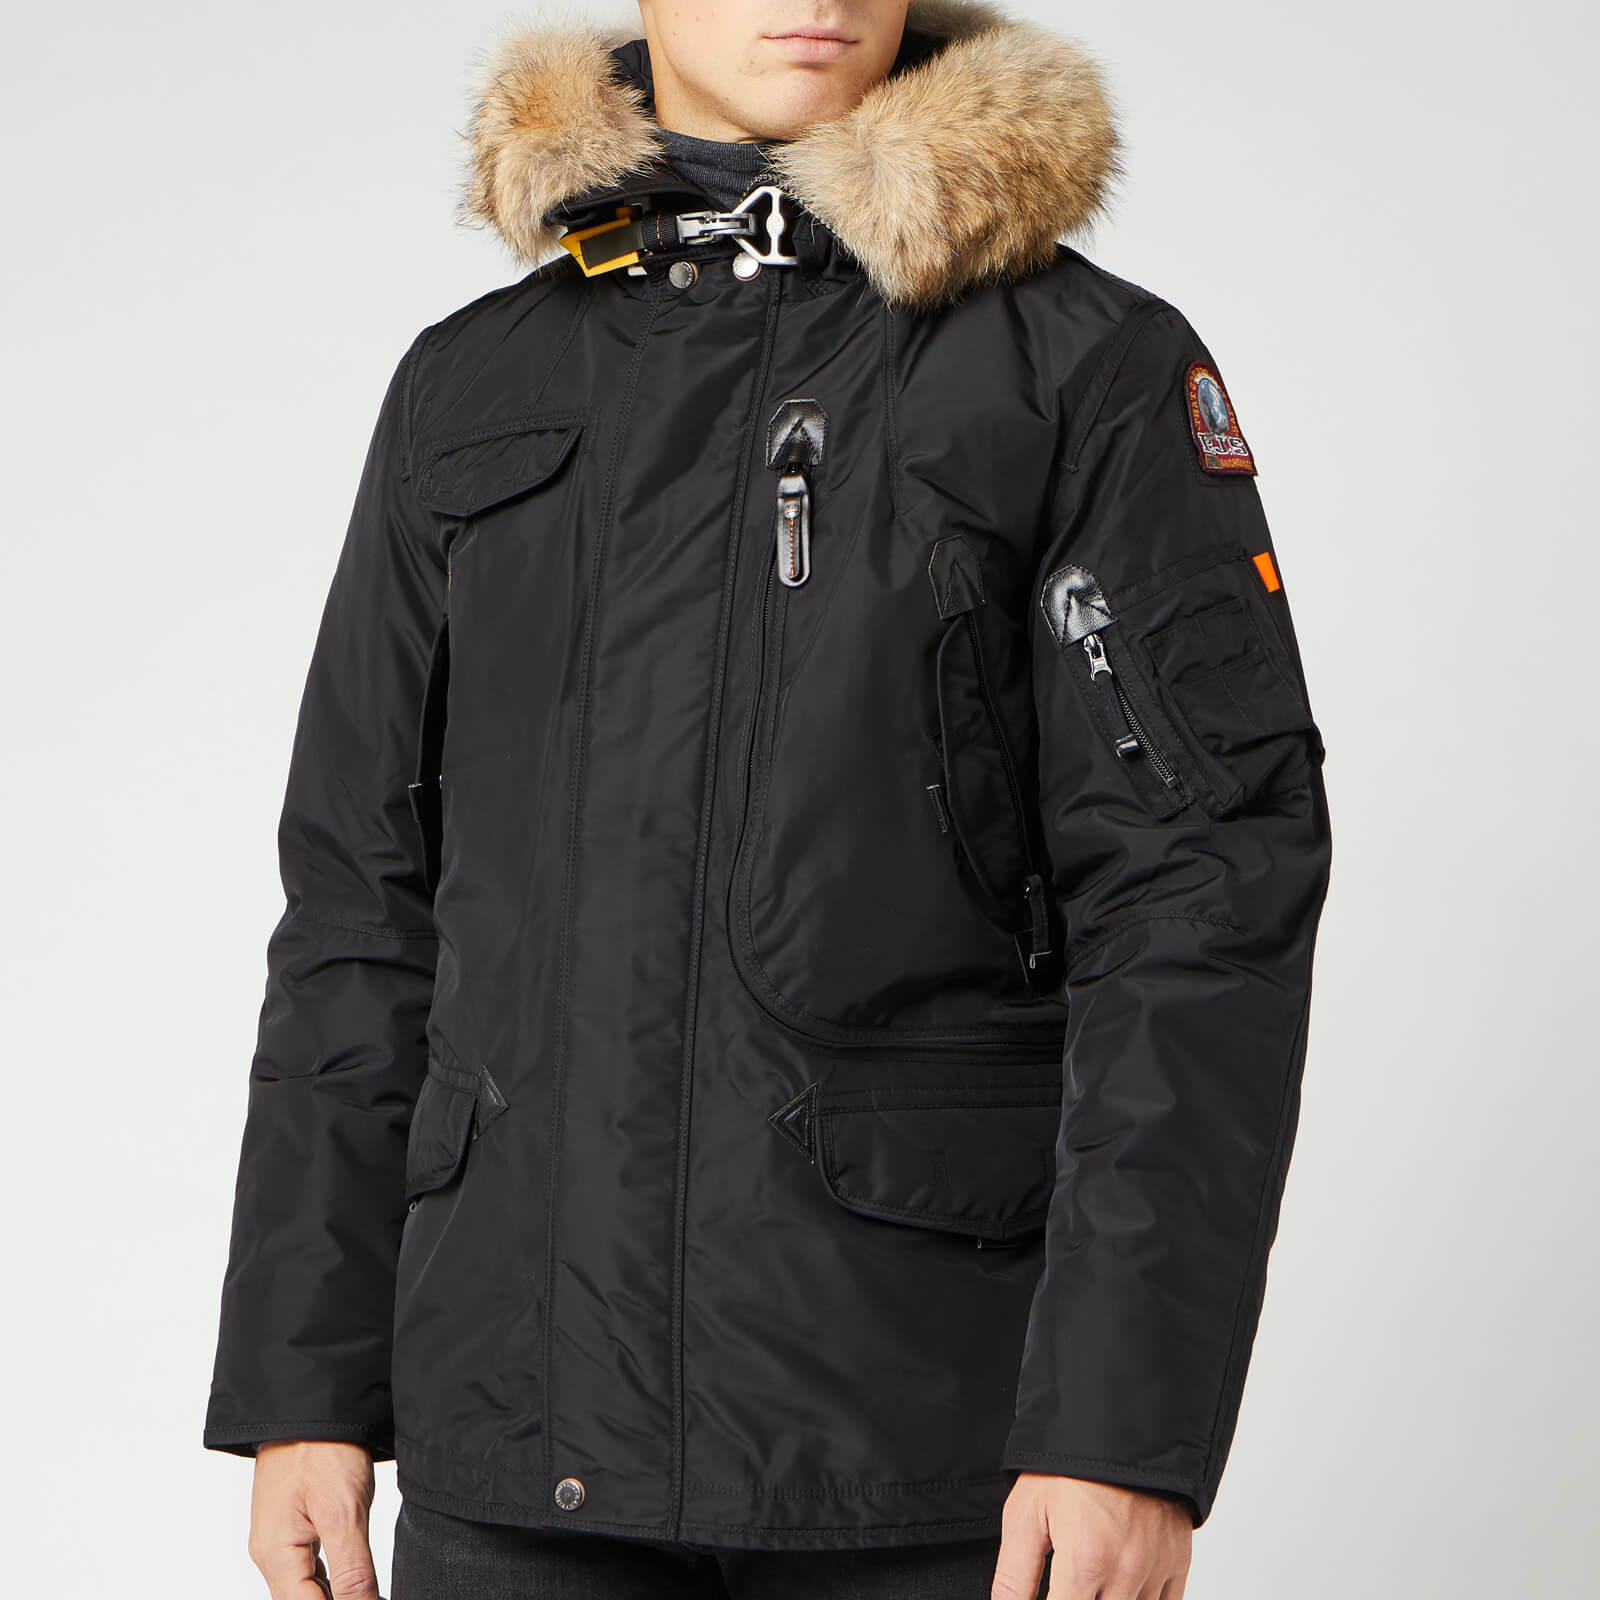 parajumpers men's right hand jacket